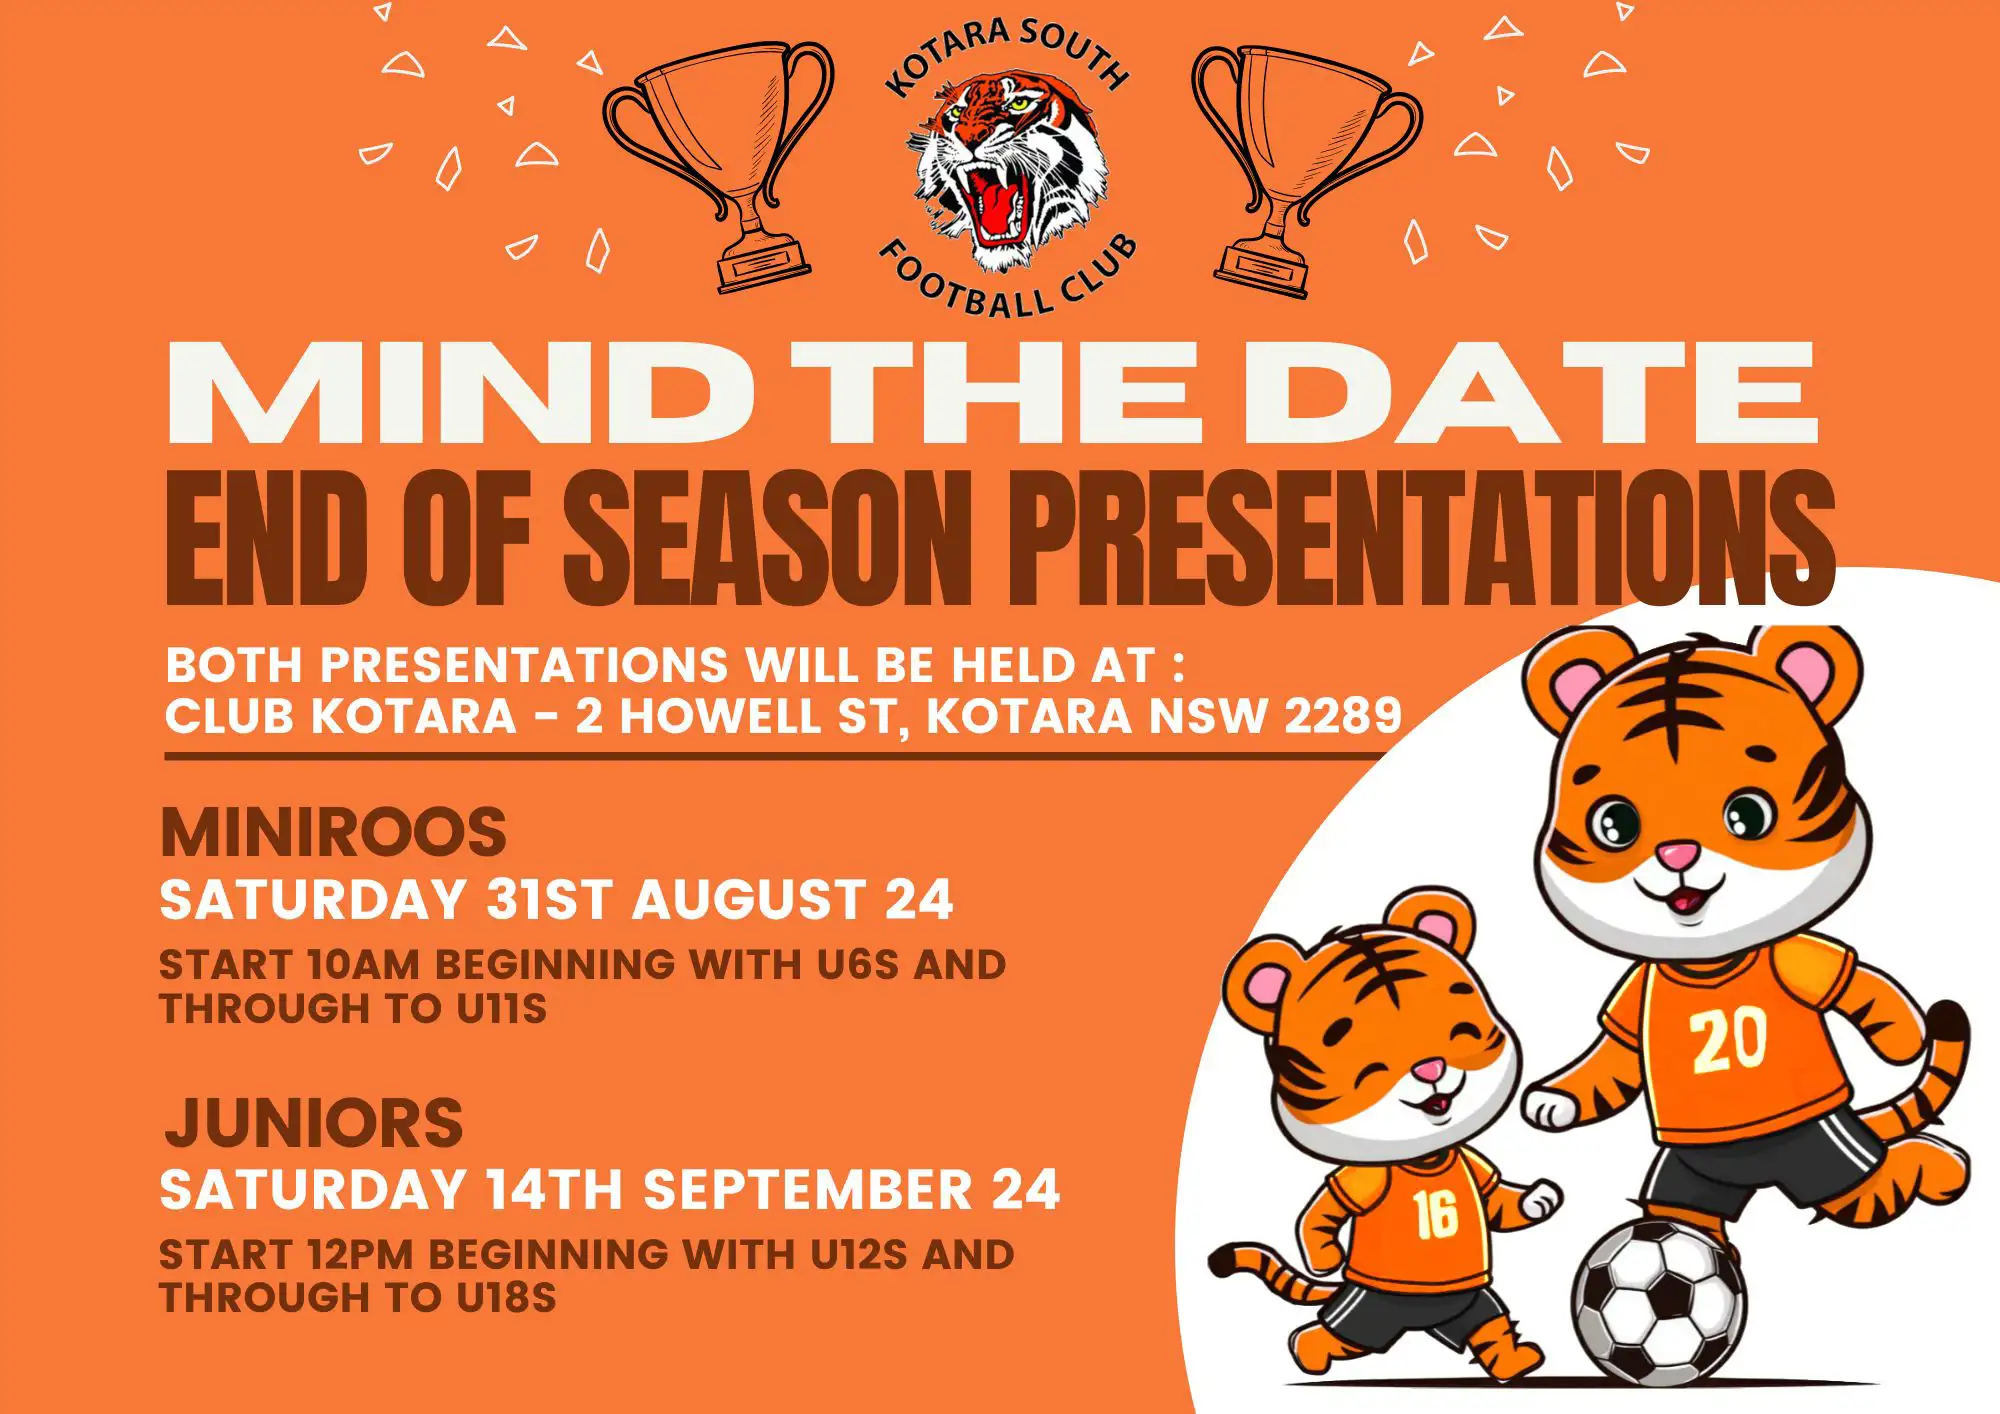 END OF SEASON PRESENTATIONS - MIND THE DATE